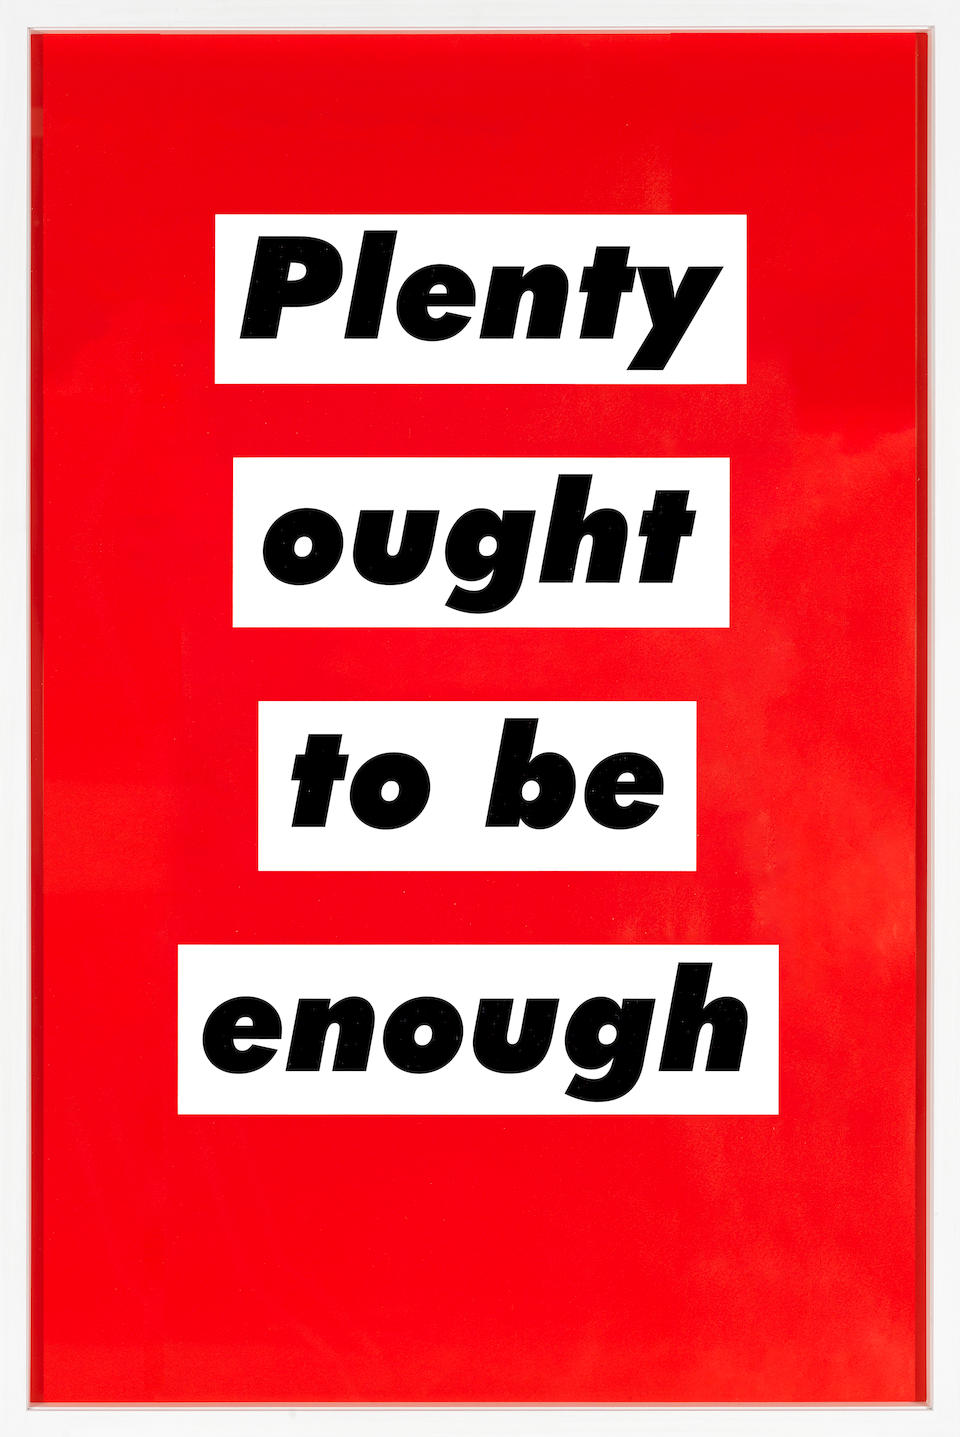 Barbara Kruger (American, born 1945) Untitled (Plenty ought to be enough) Offset lithograph printed in colours, 2003, on wove, published by Mother for Selfridges, London, the full sheet printed to the edges, 750 x 495mm (29 1/2 x 19 1/2in)(SH)